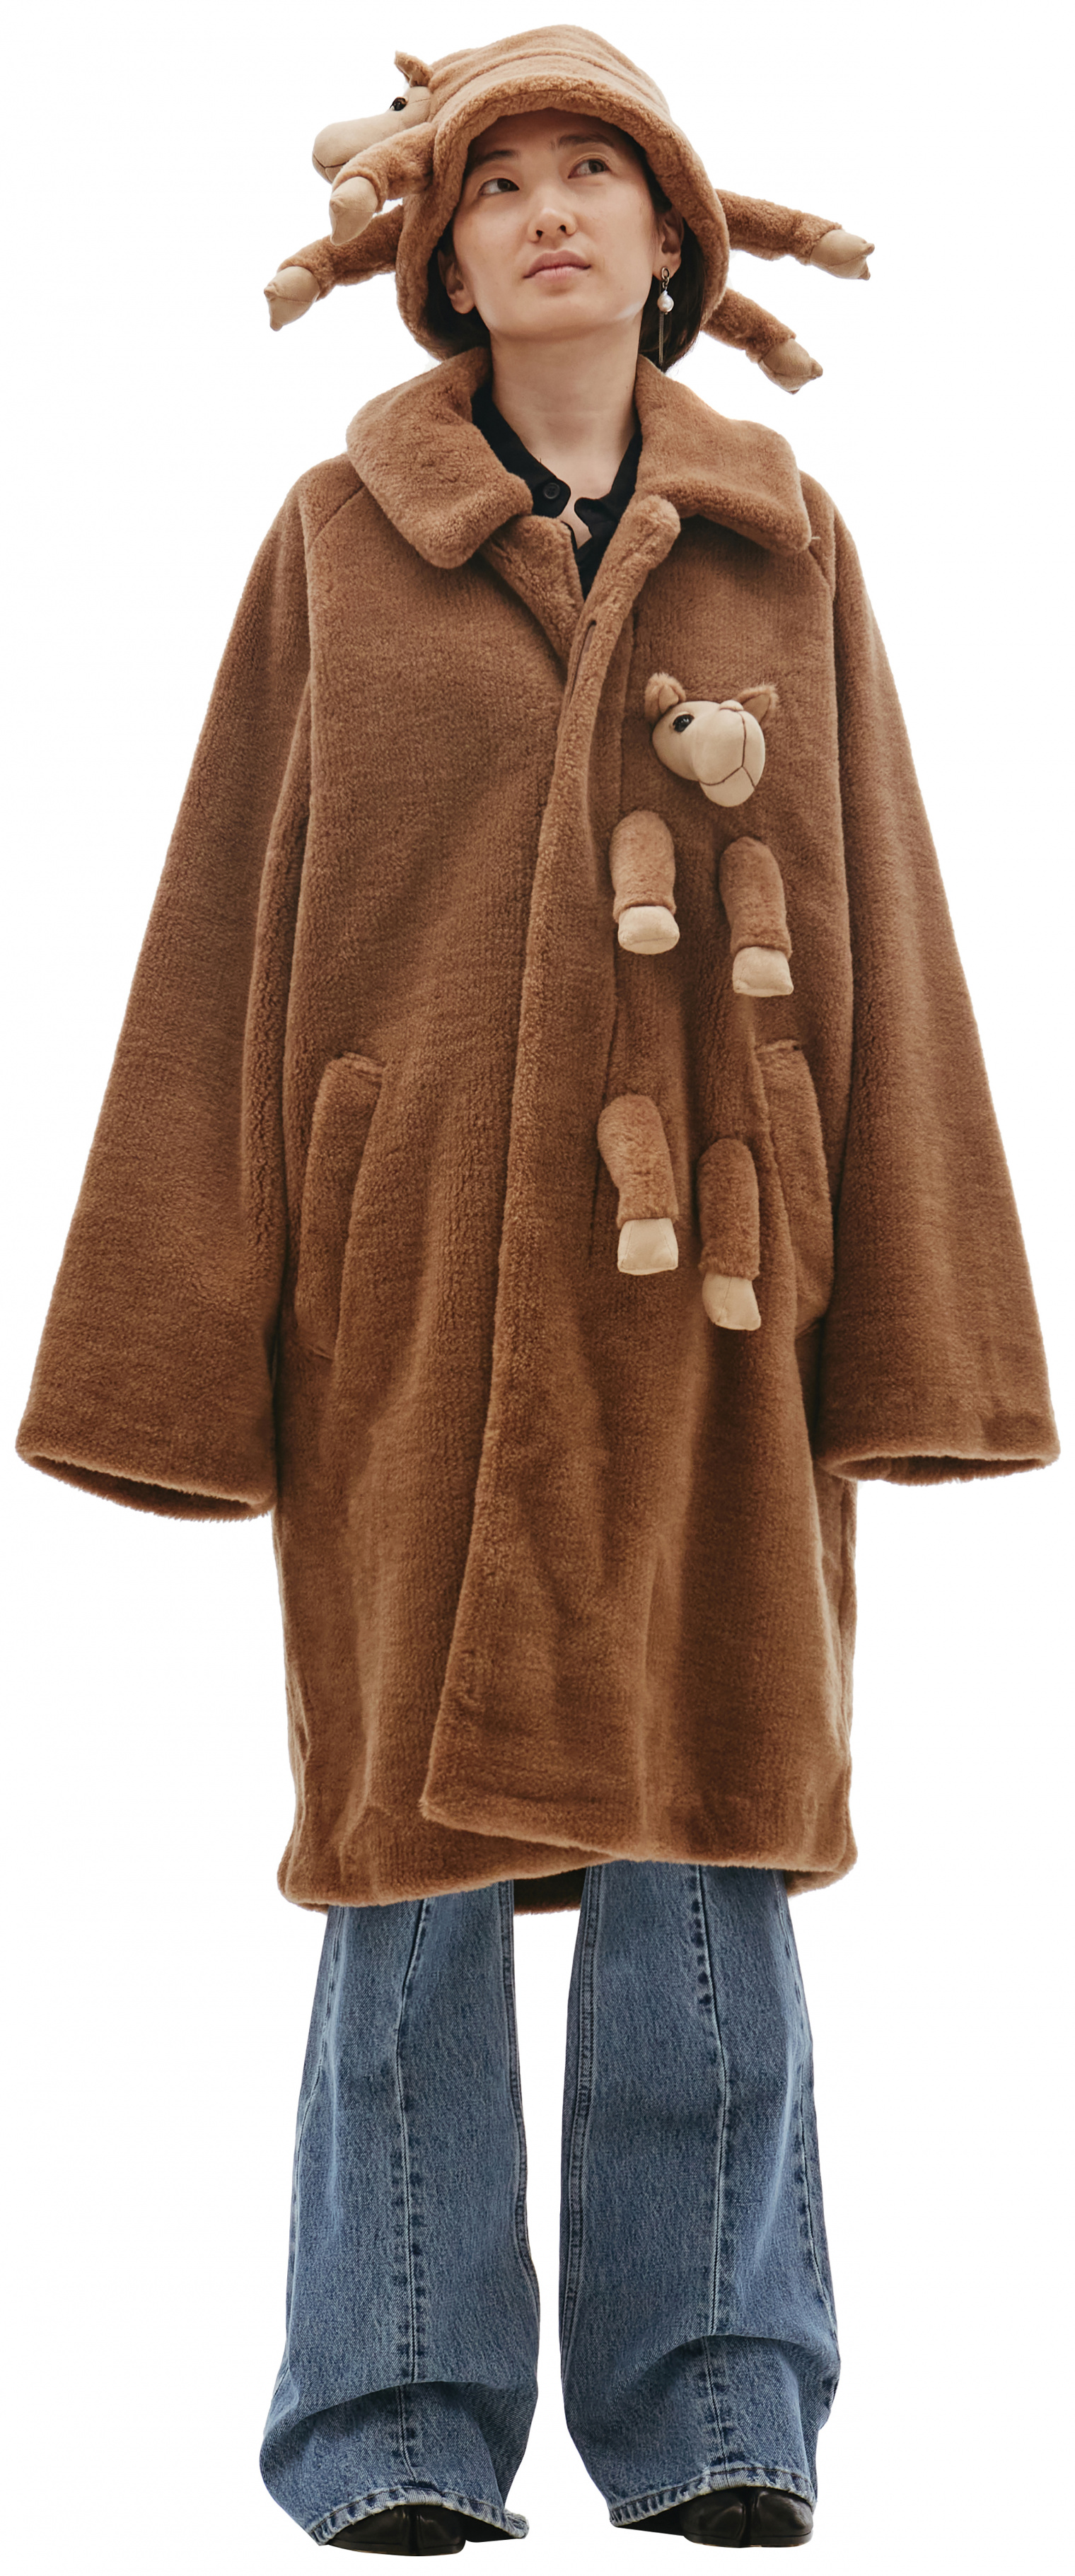 Doublet Camel Wool Coat With Sewn-On Toy